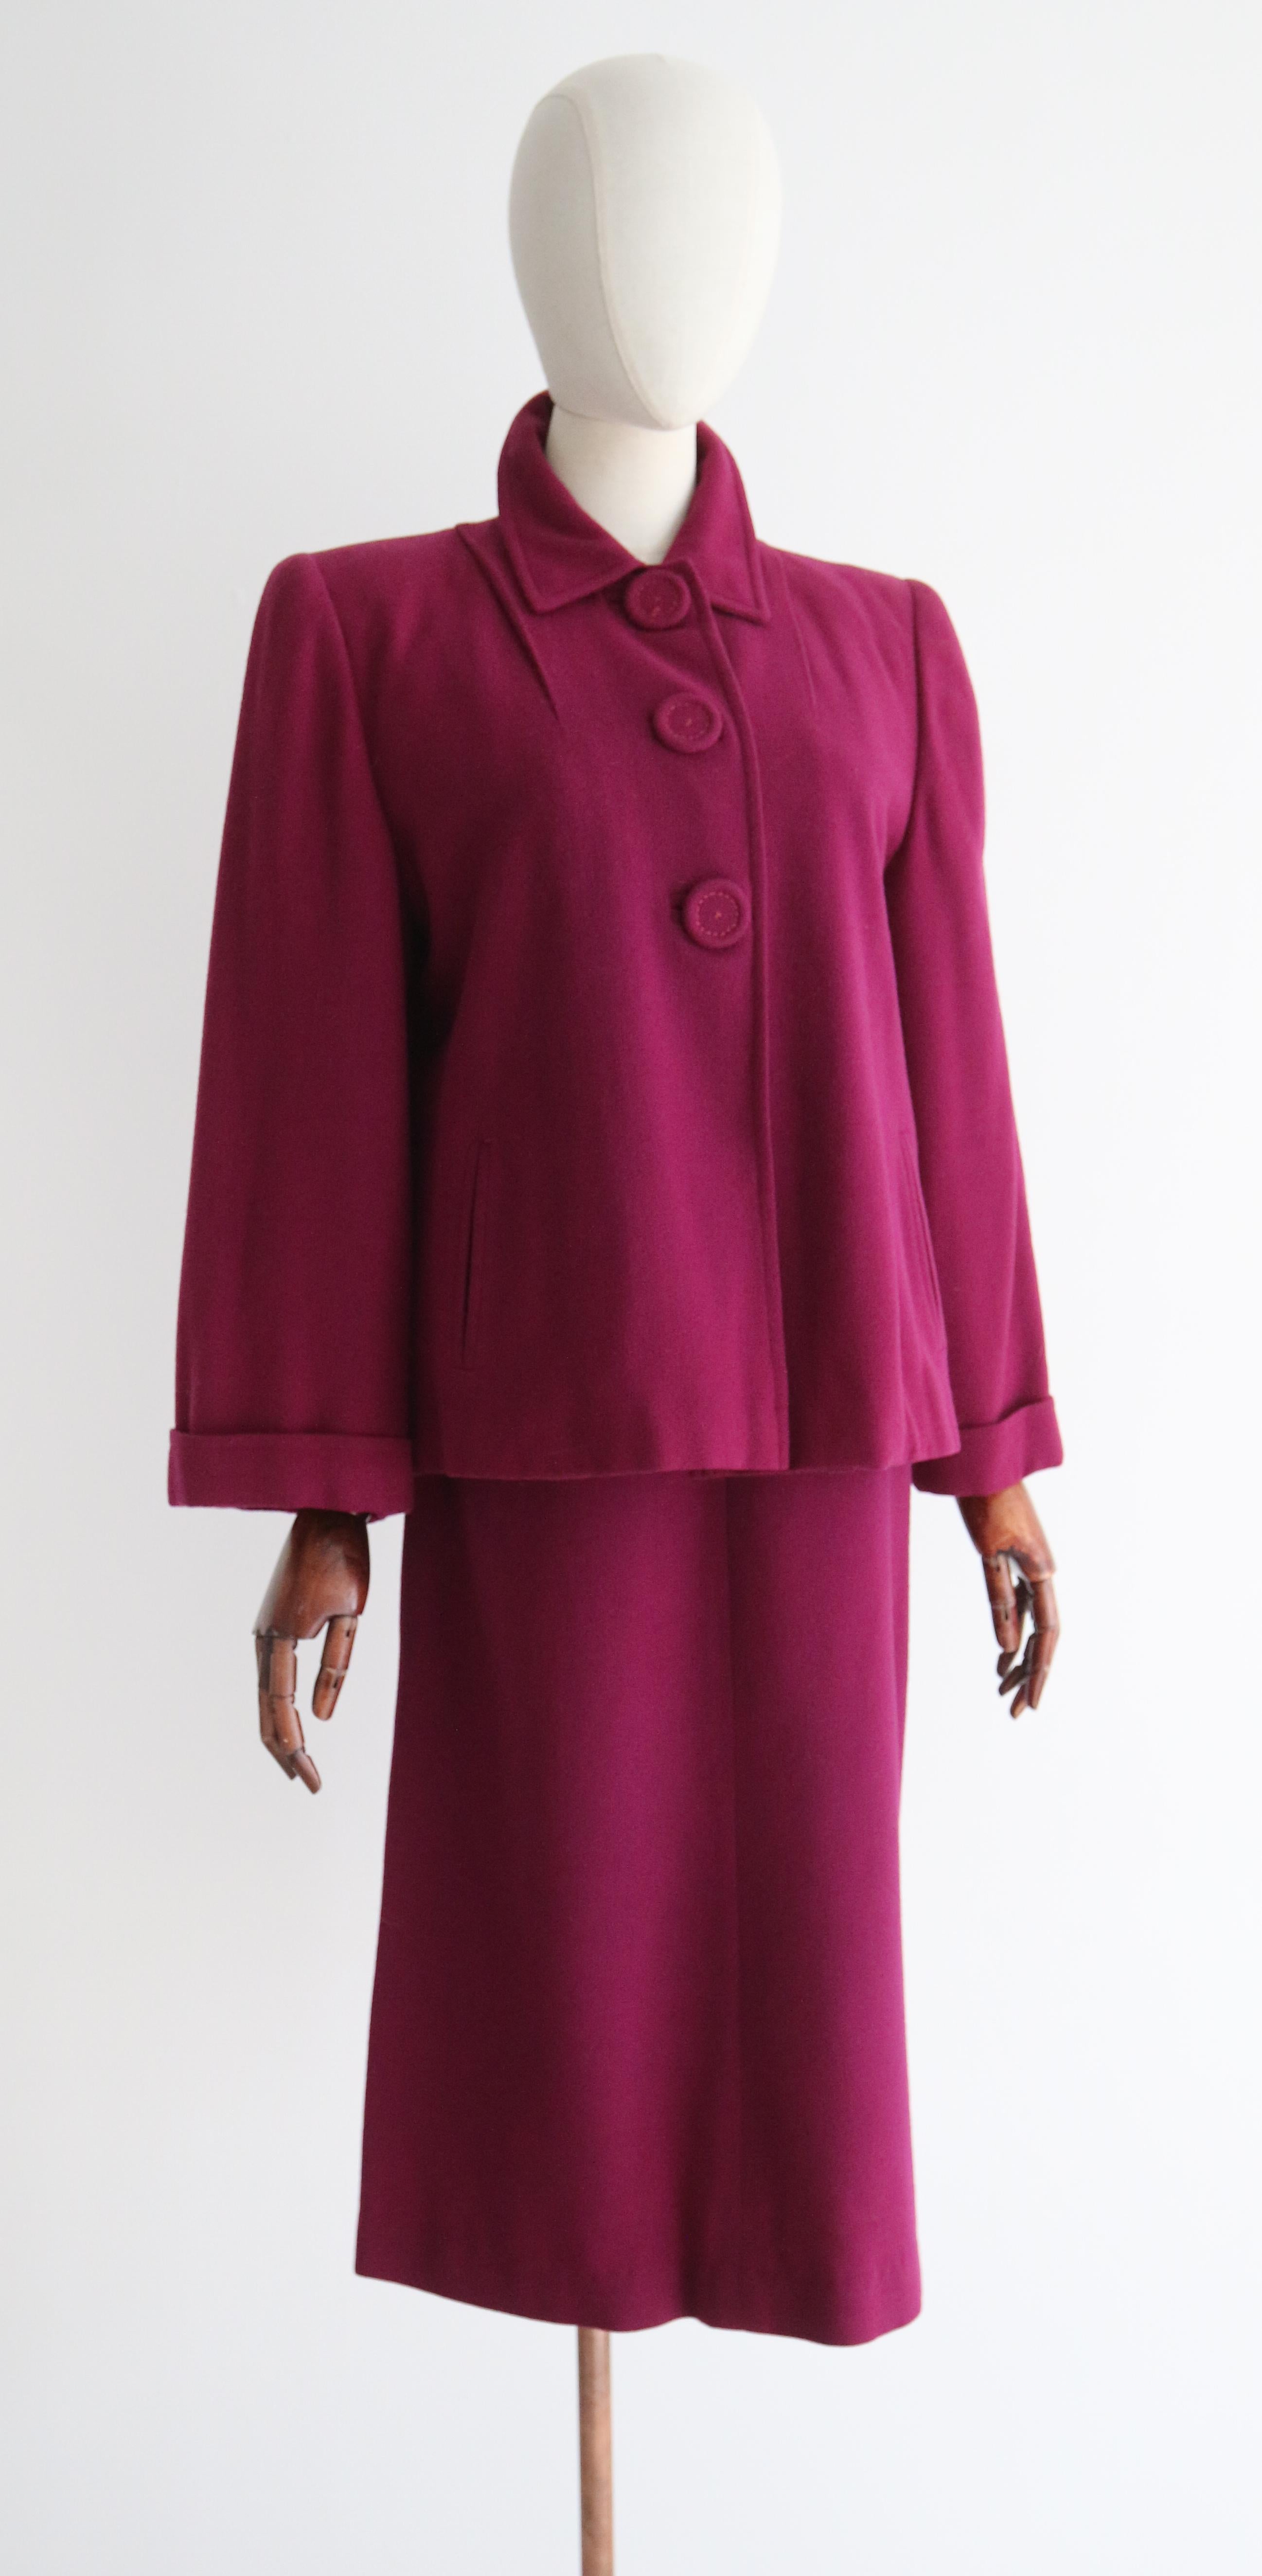 Vintage 1940's Plum Three Piece Wool Suit UK 10-12 US 6-8 In Good Condition For Sale In Cheltenham, GB